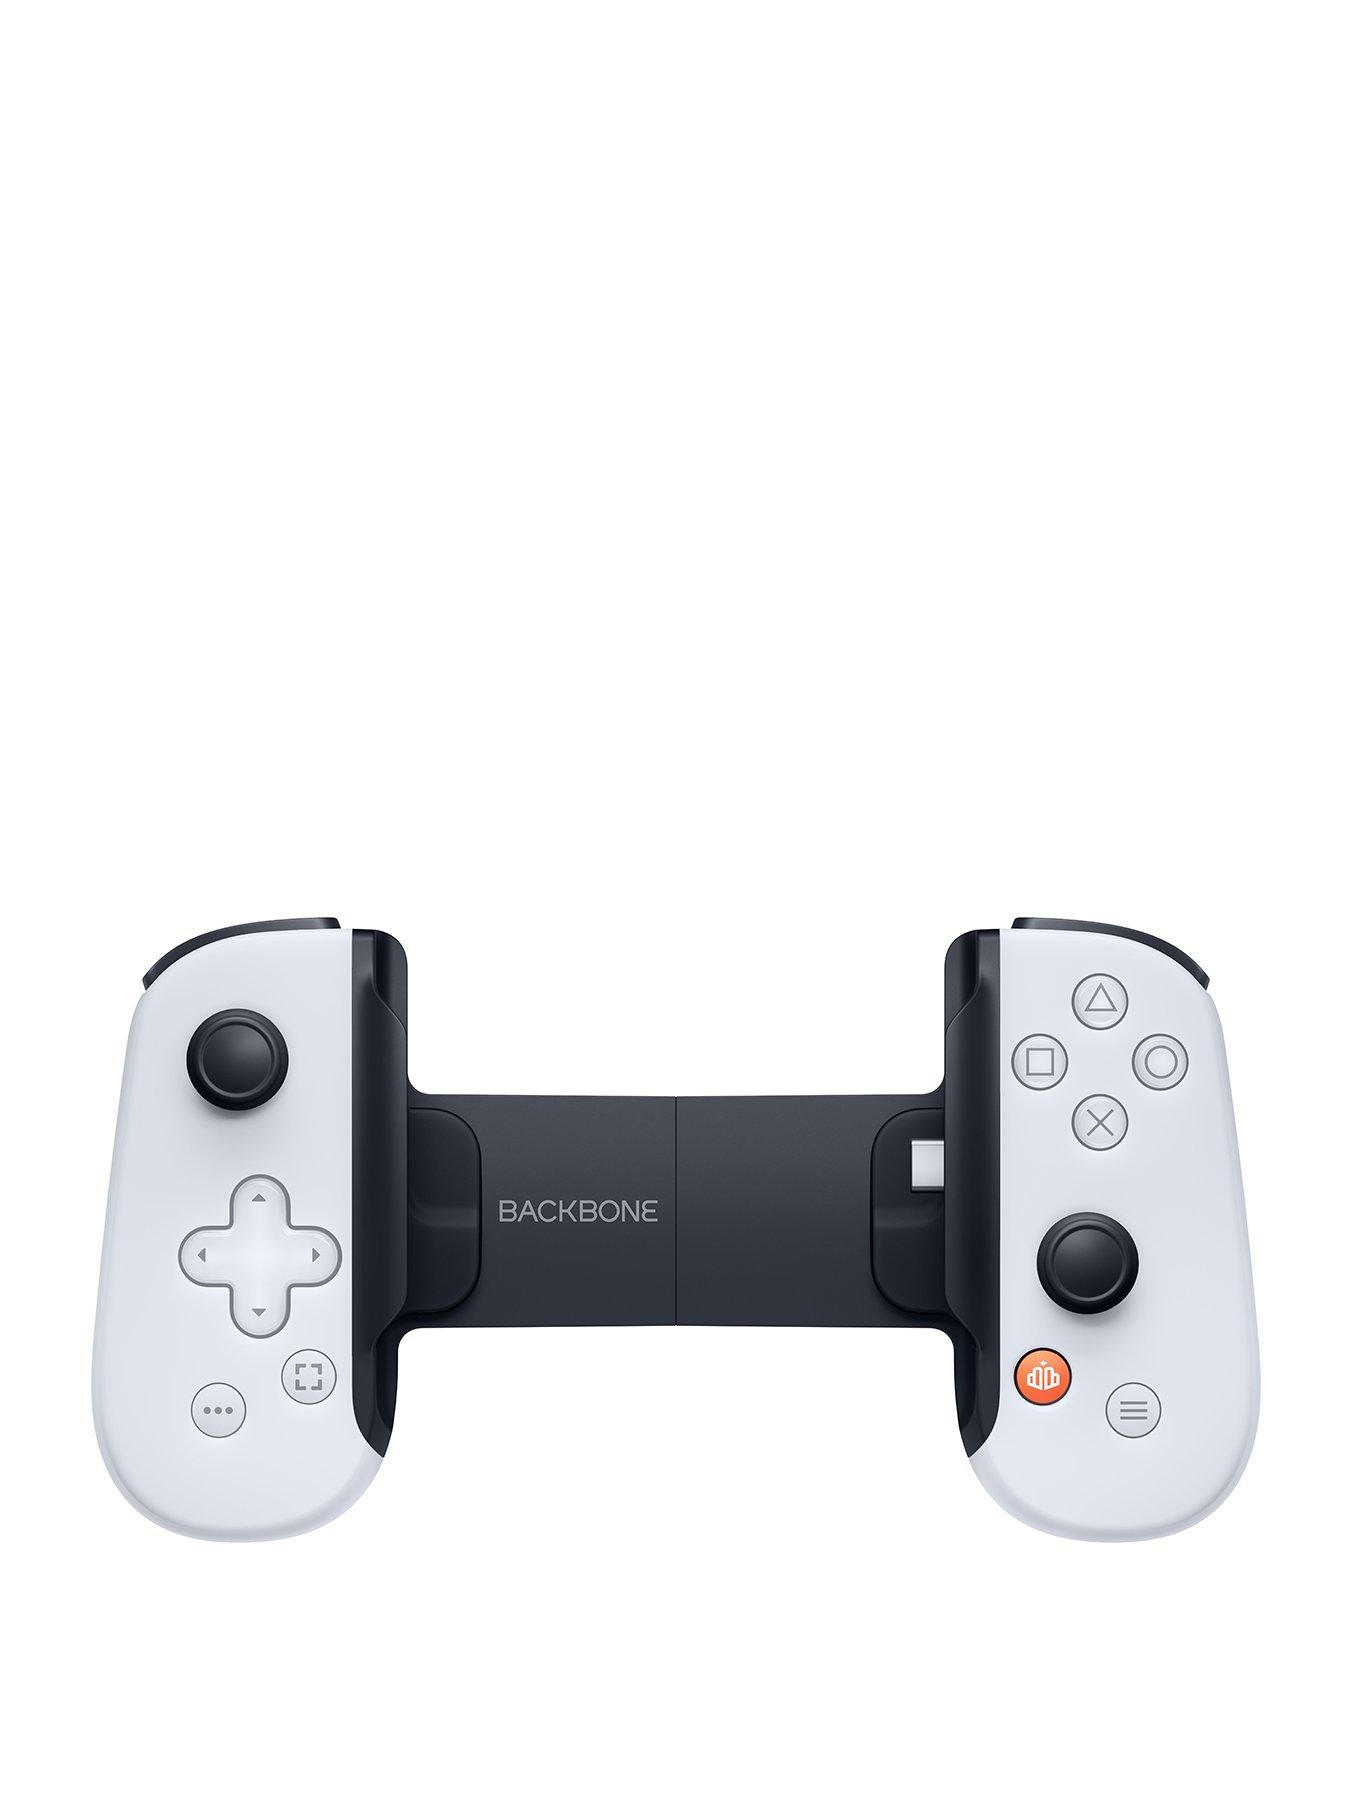 Backbone One - Standard - gamepad - wired - black - for Android 